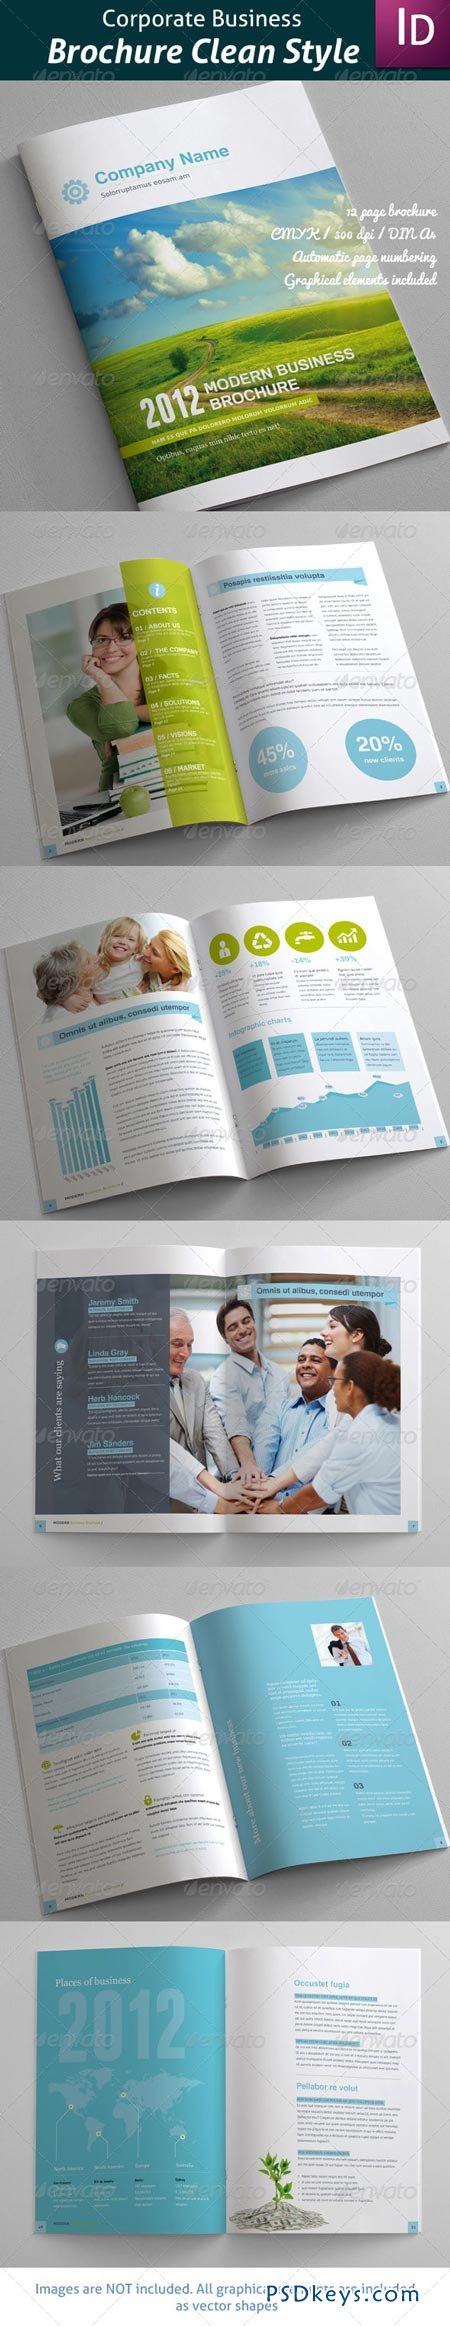 Business Brochure Clean Style 2555359